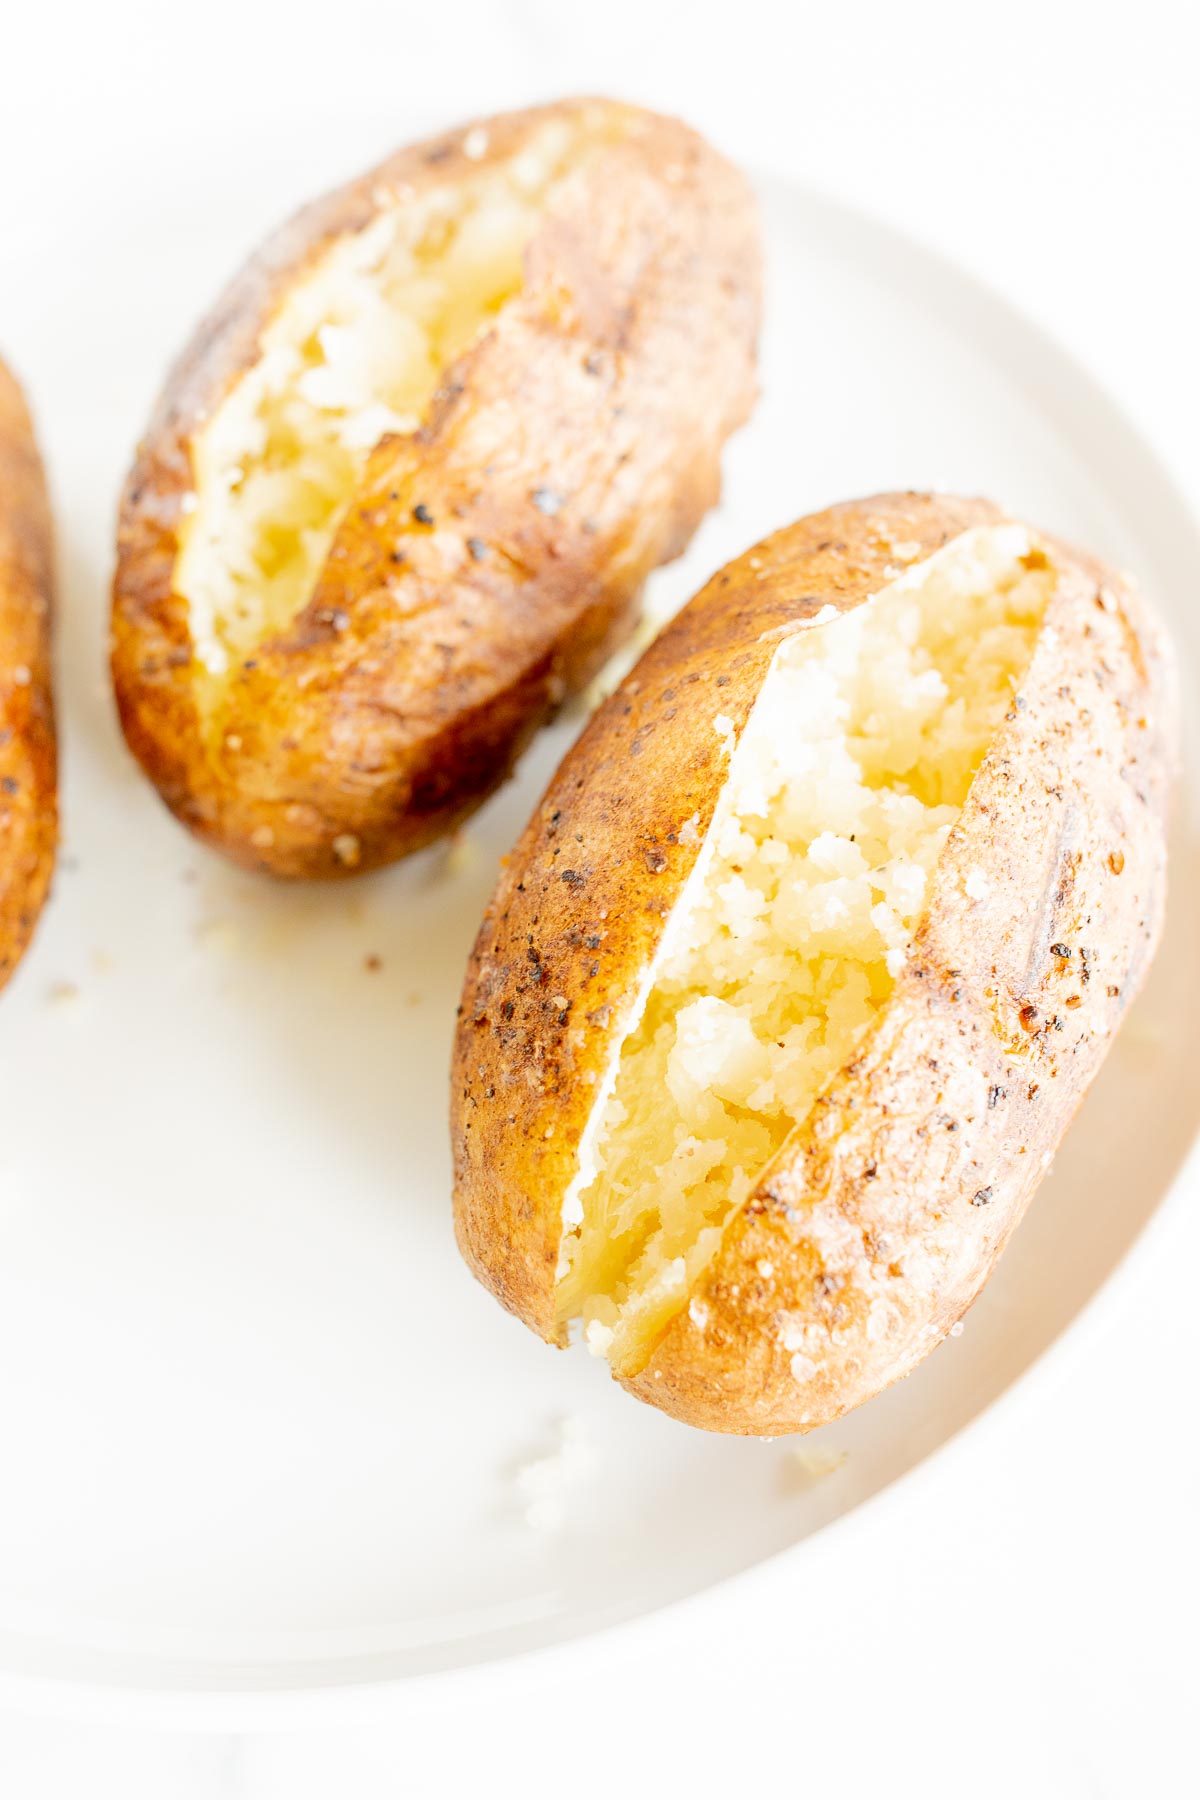 grilled baked potatoes on a white plate